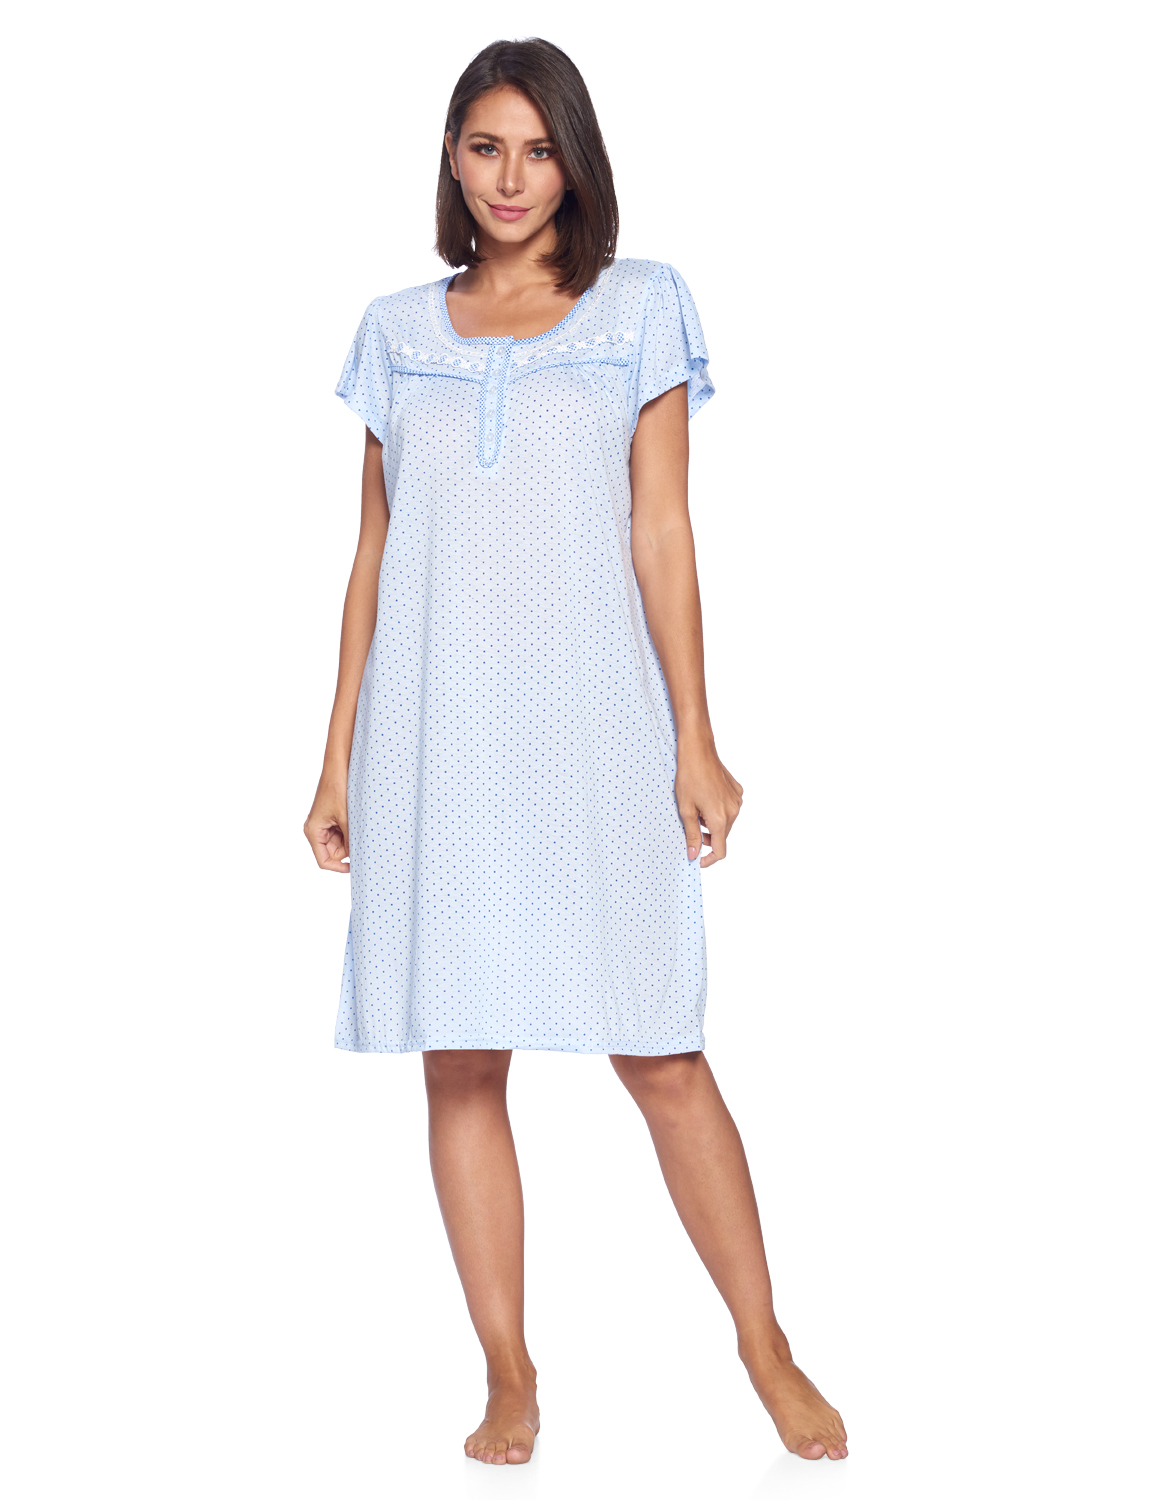 Casual Nights Women's Short Sleeve Polka Dot And Lace Nightgown - Blue ...